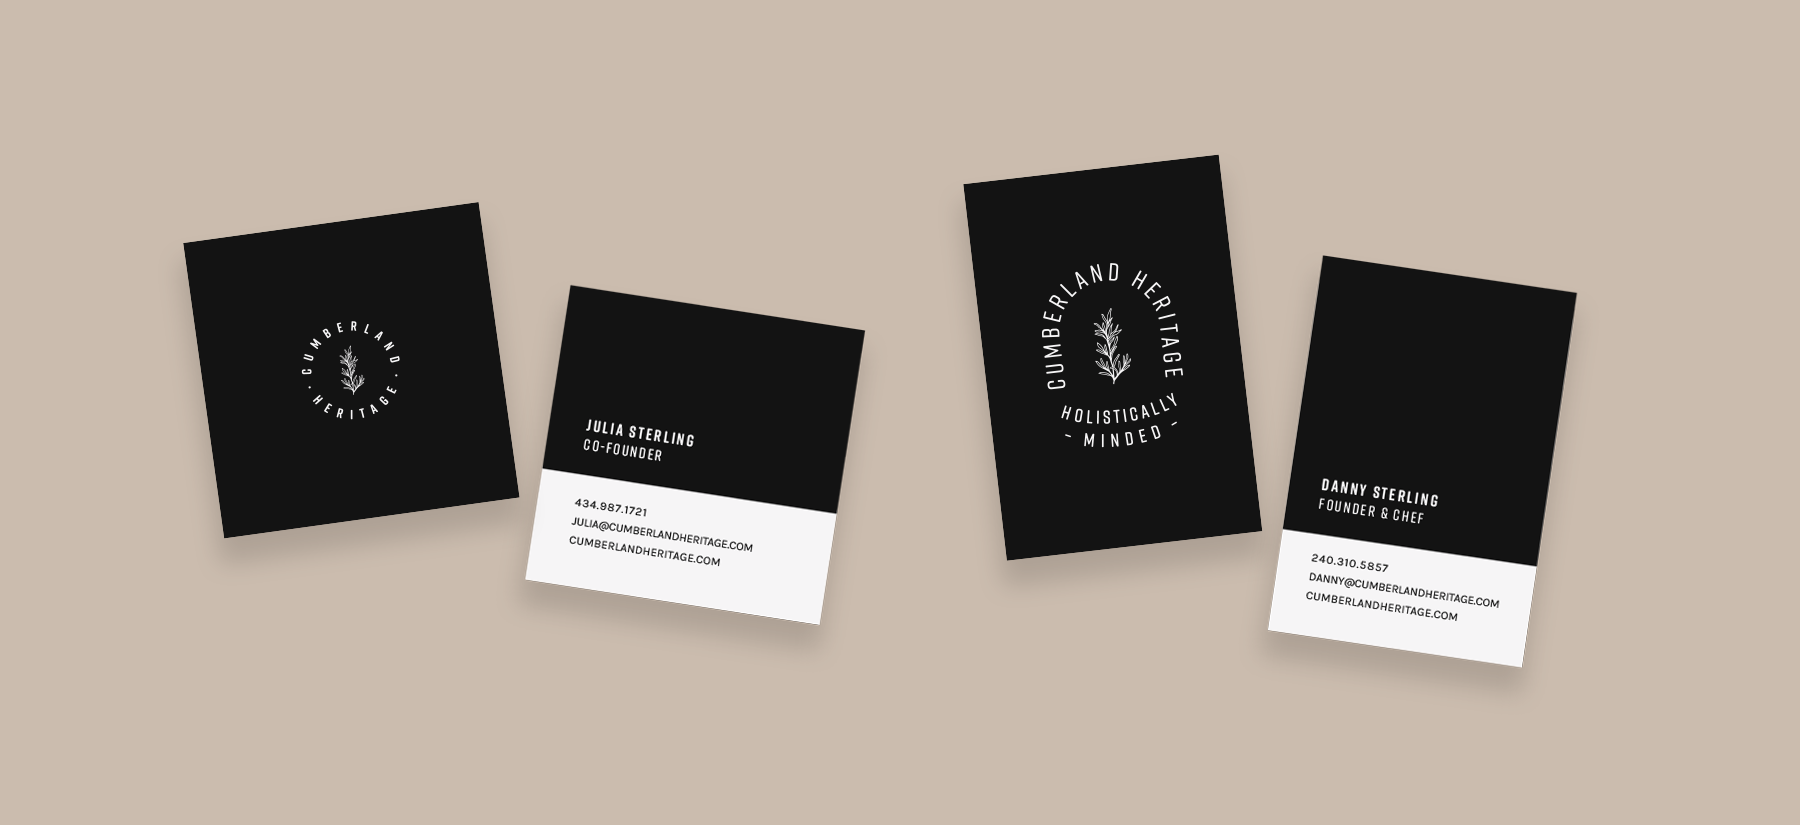 Cumberland Heritage branding applied to two business card mockups using black & white as their main colors. Both have alternate logos on the front, along with names and contact information on the back.